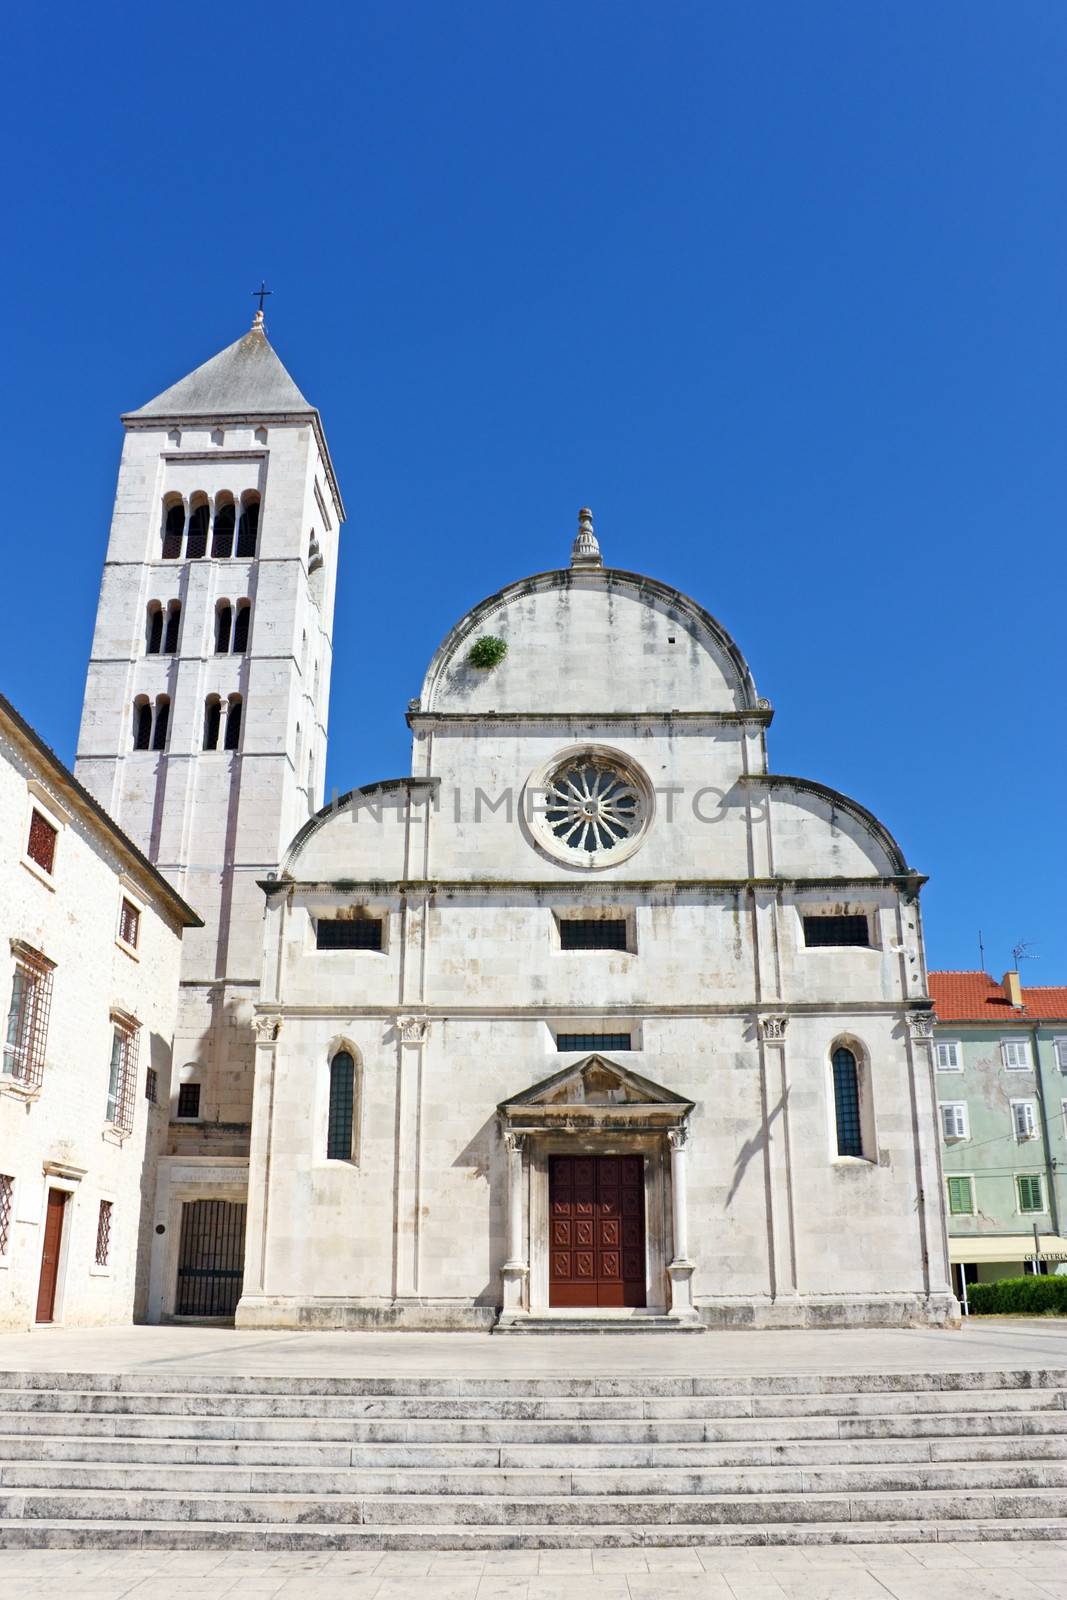 St. Mary's church located in the old city of Zadar opposite St. Donatus Church